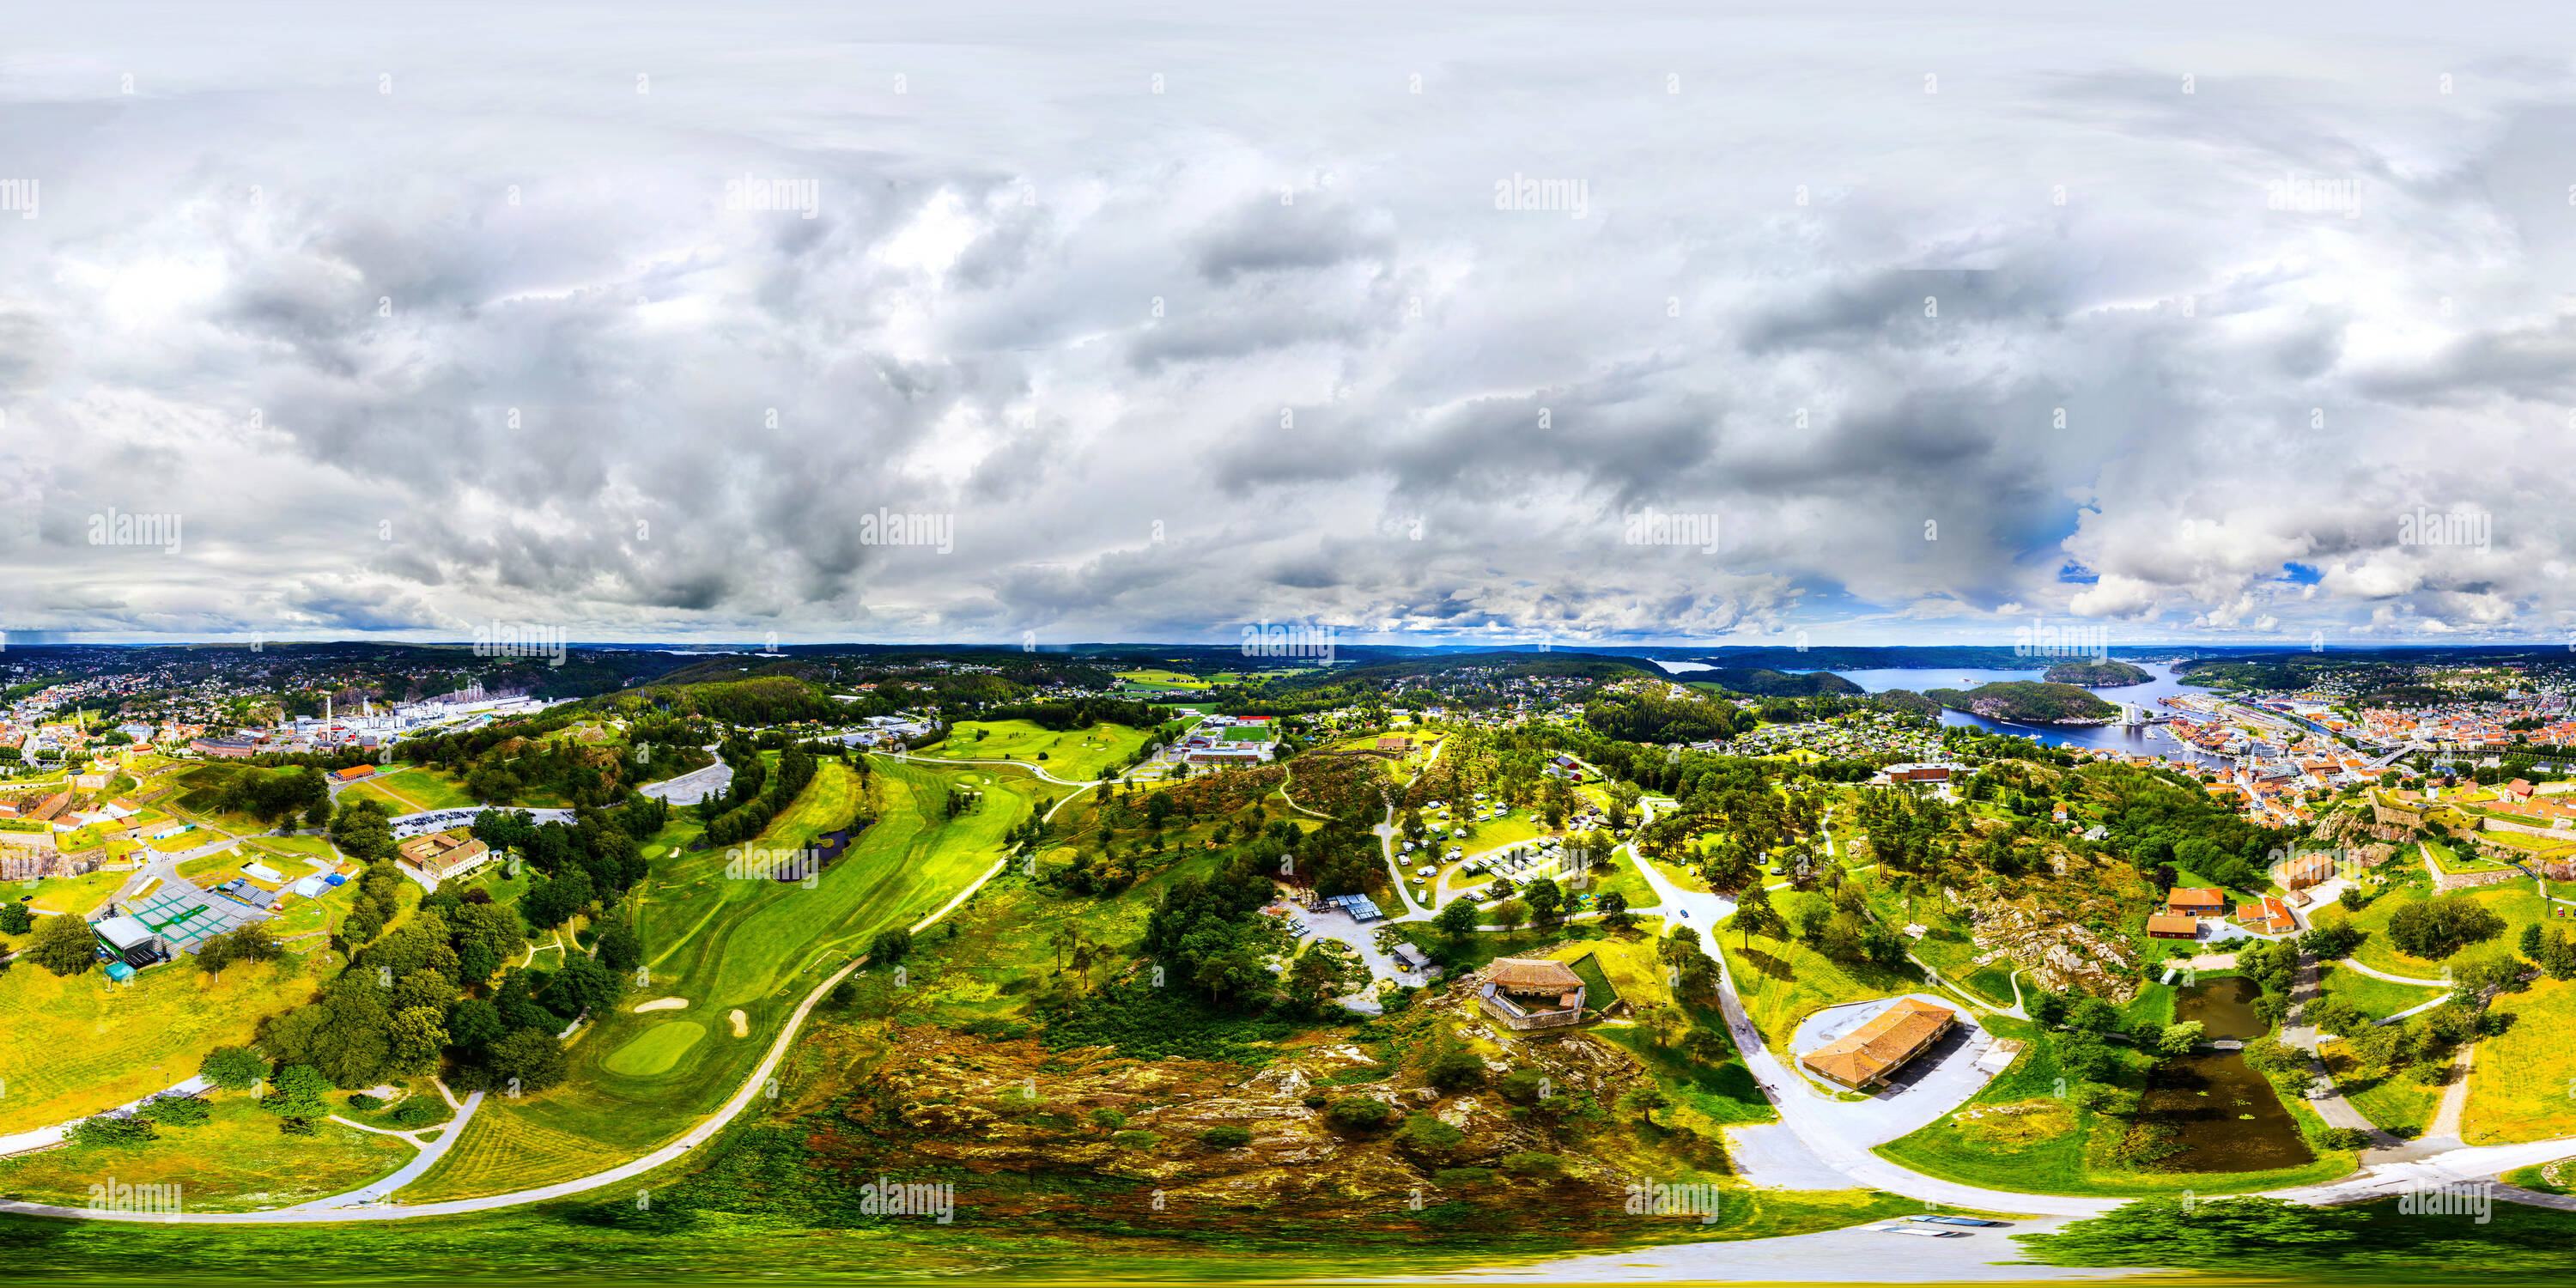 360 degree panoramic view of Halden, Norway. Aerial view of the Fredriksted fortress in Halden, Norway with city at the background. View of fortress during a cloudy summer